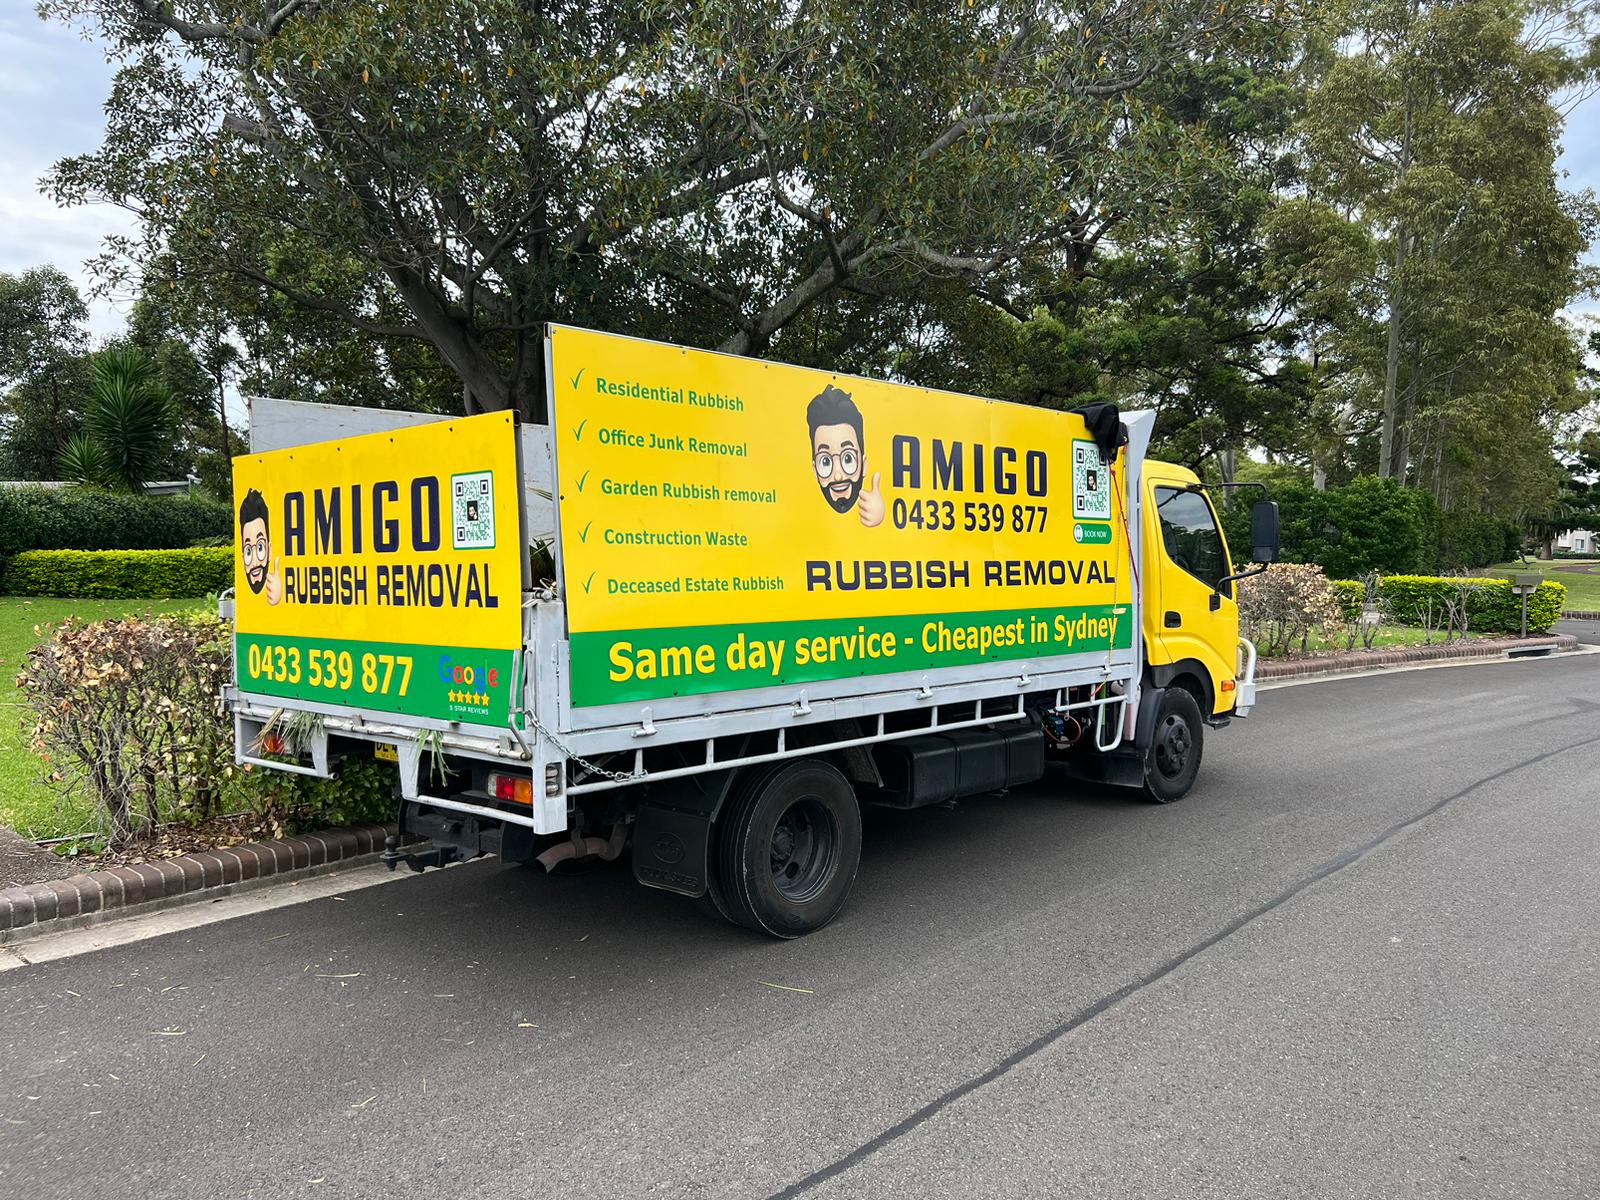 Our trucks are on the road ready to roll up to your Sydney home or business and leave it lovely and clear of junk and rubbish.